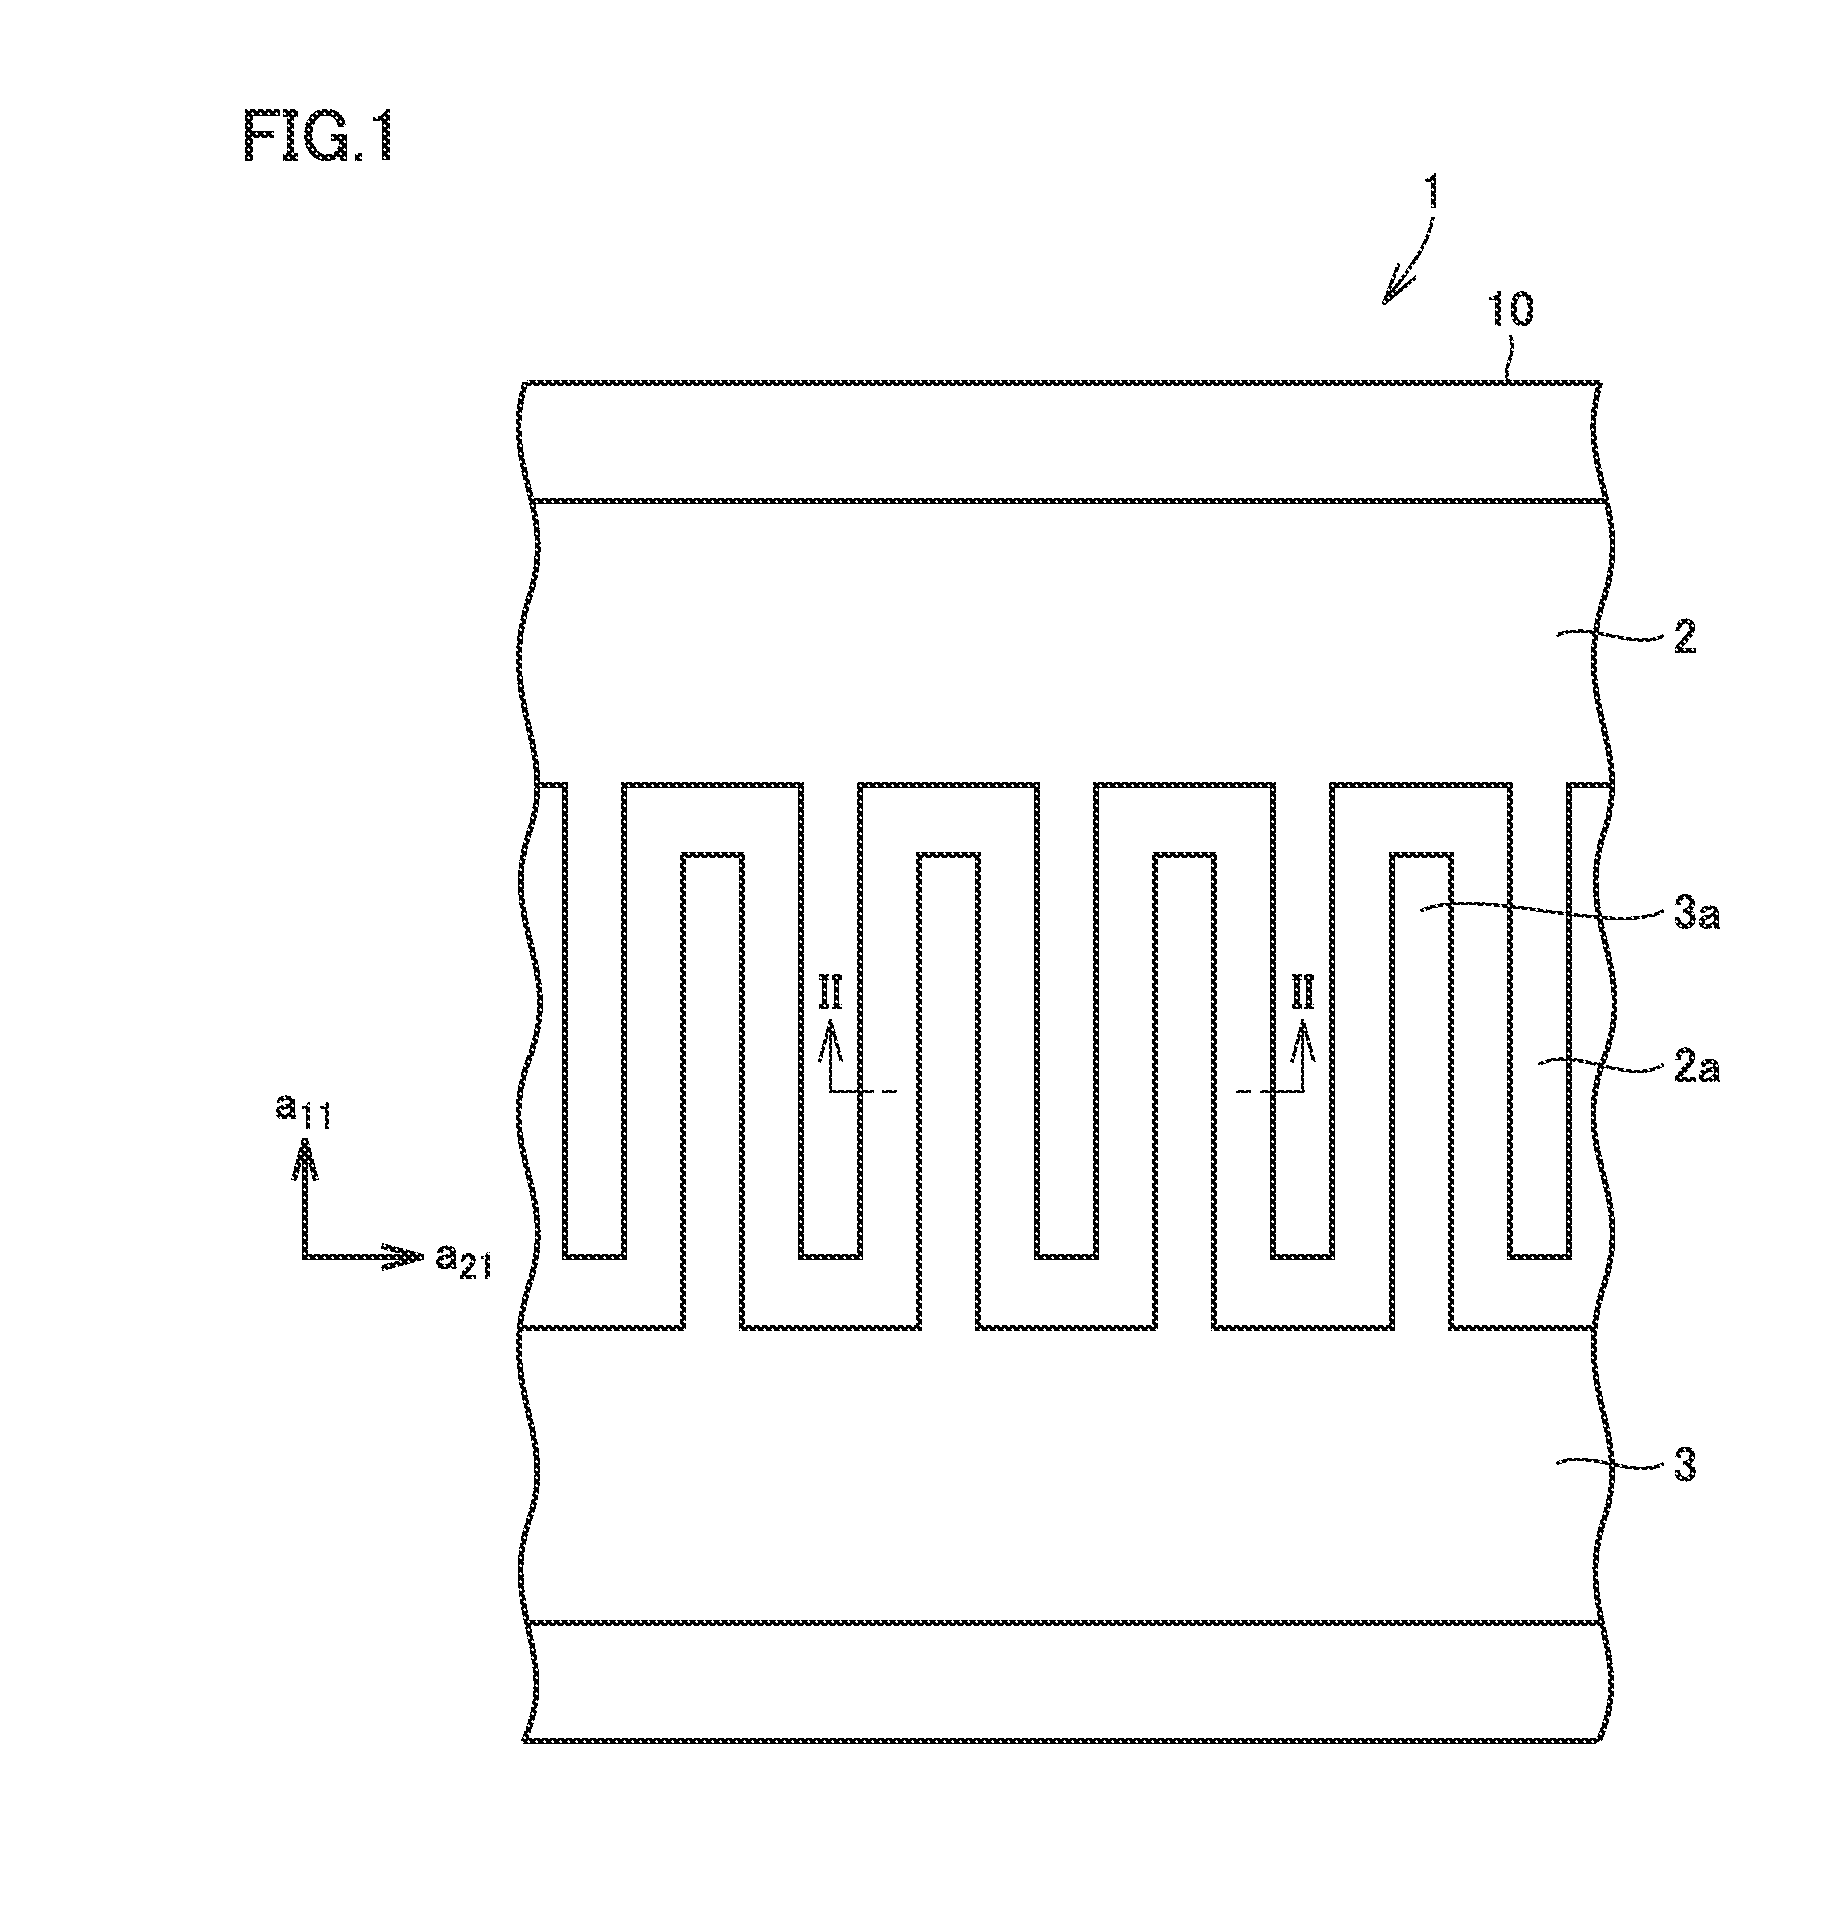 Silicon carbide semiconductor device and method of manufacturing the same